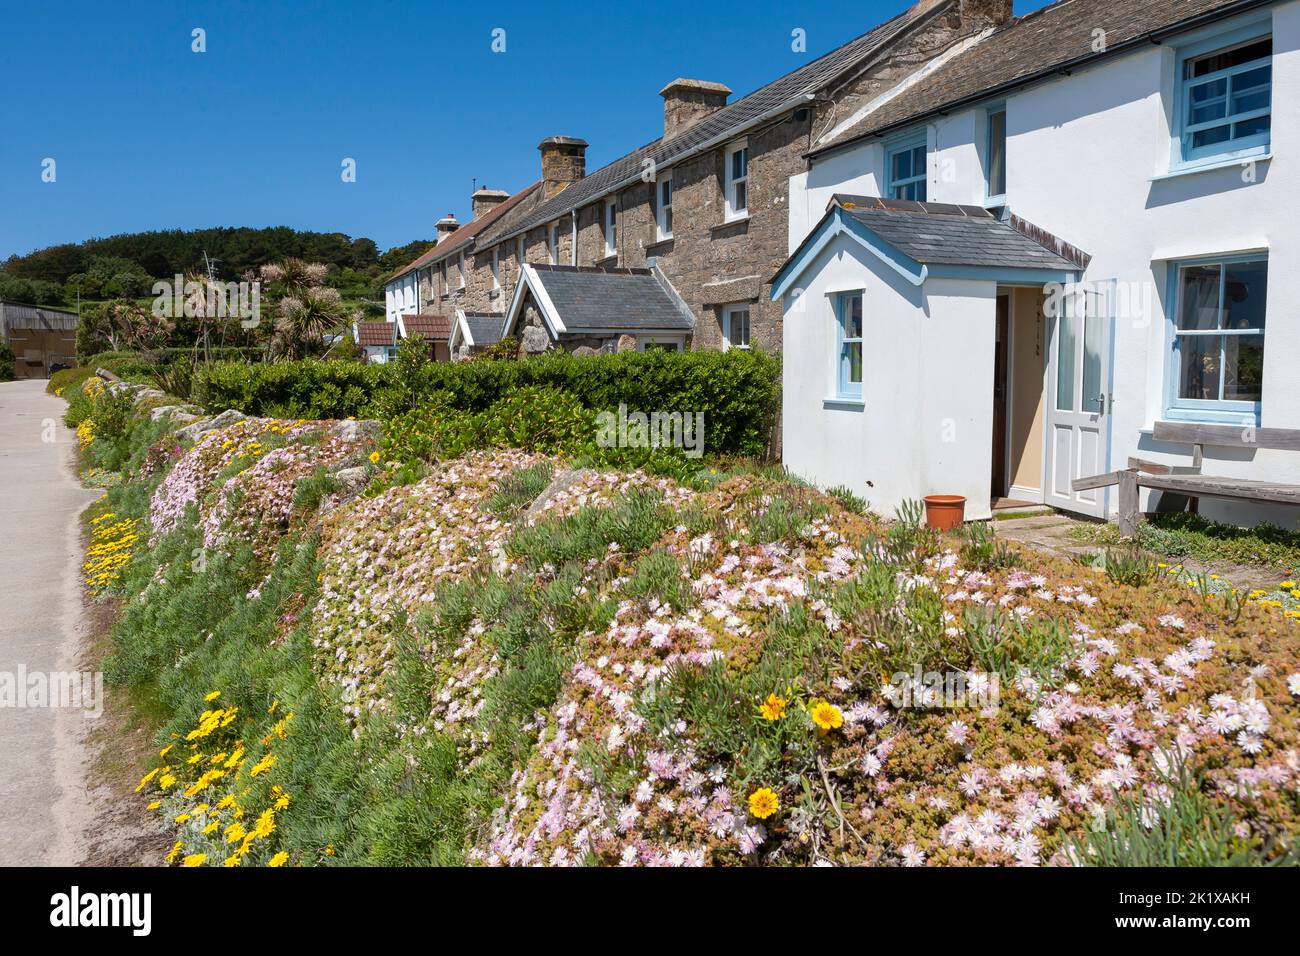 Row of cottages with a profusion of flowers growing over the garden walls: New Grimsby Quay, Tresco, Isles of Scilly, UK Stock Photo